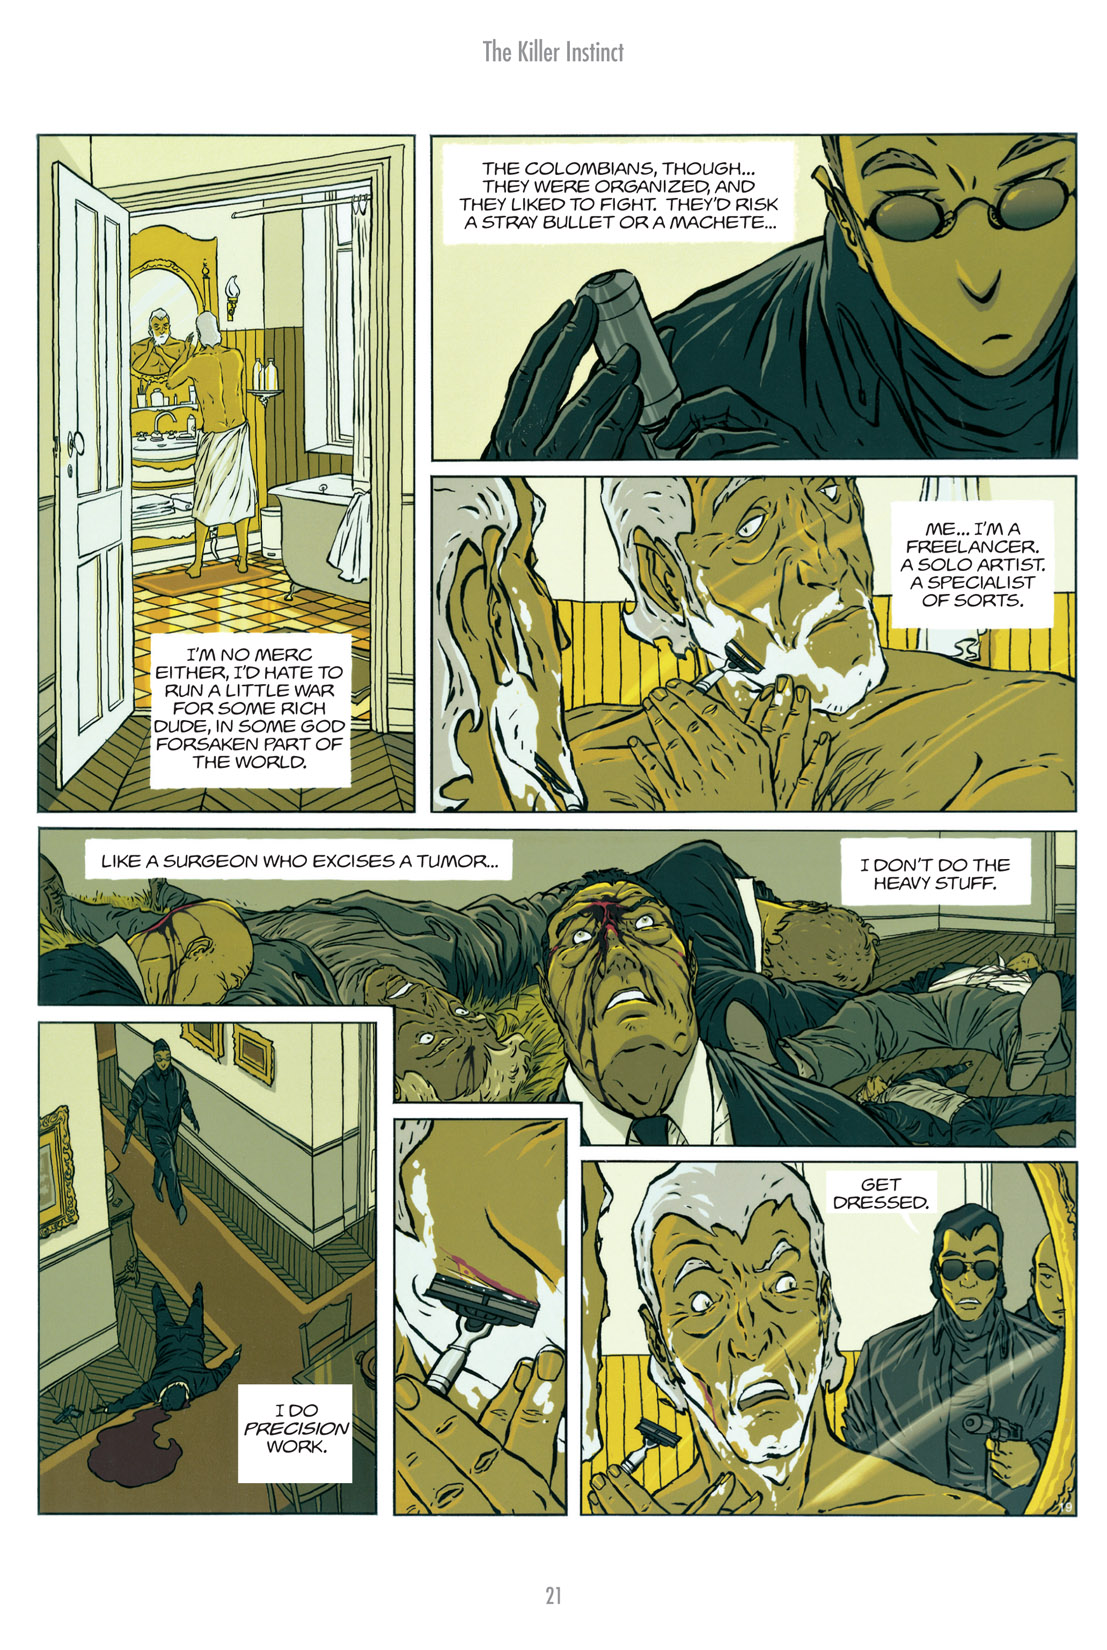 Read online The Killer comic -  Issue # TPB 2 - 146